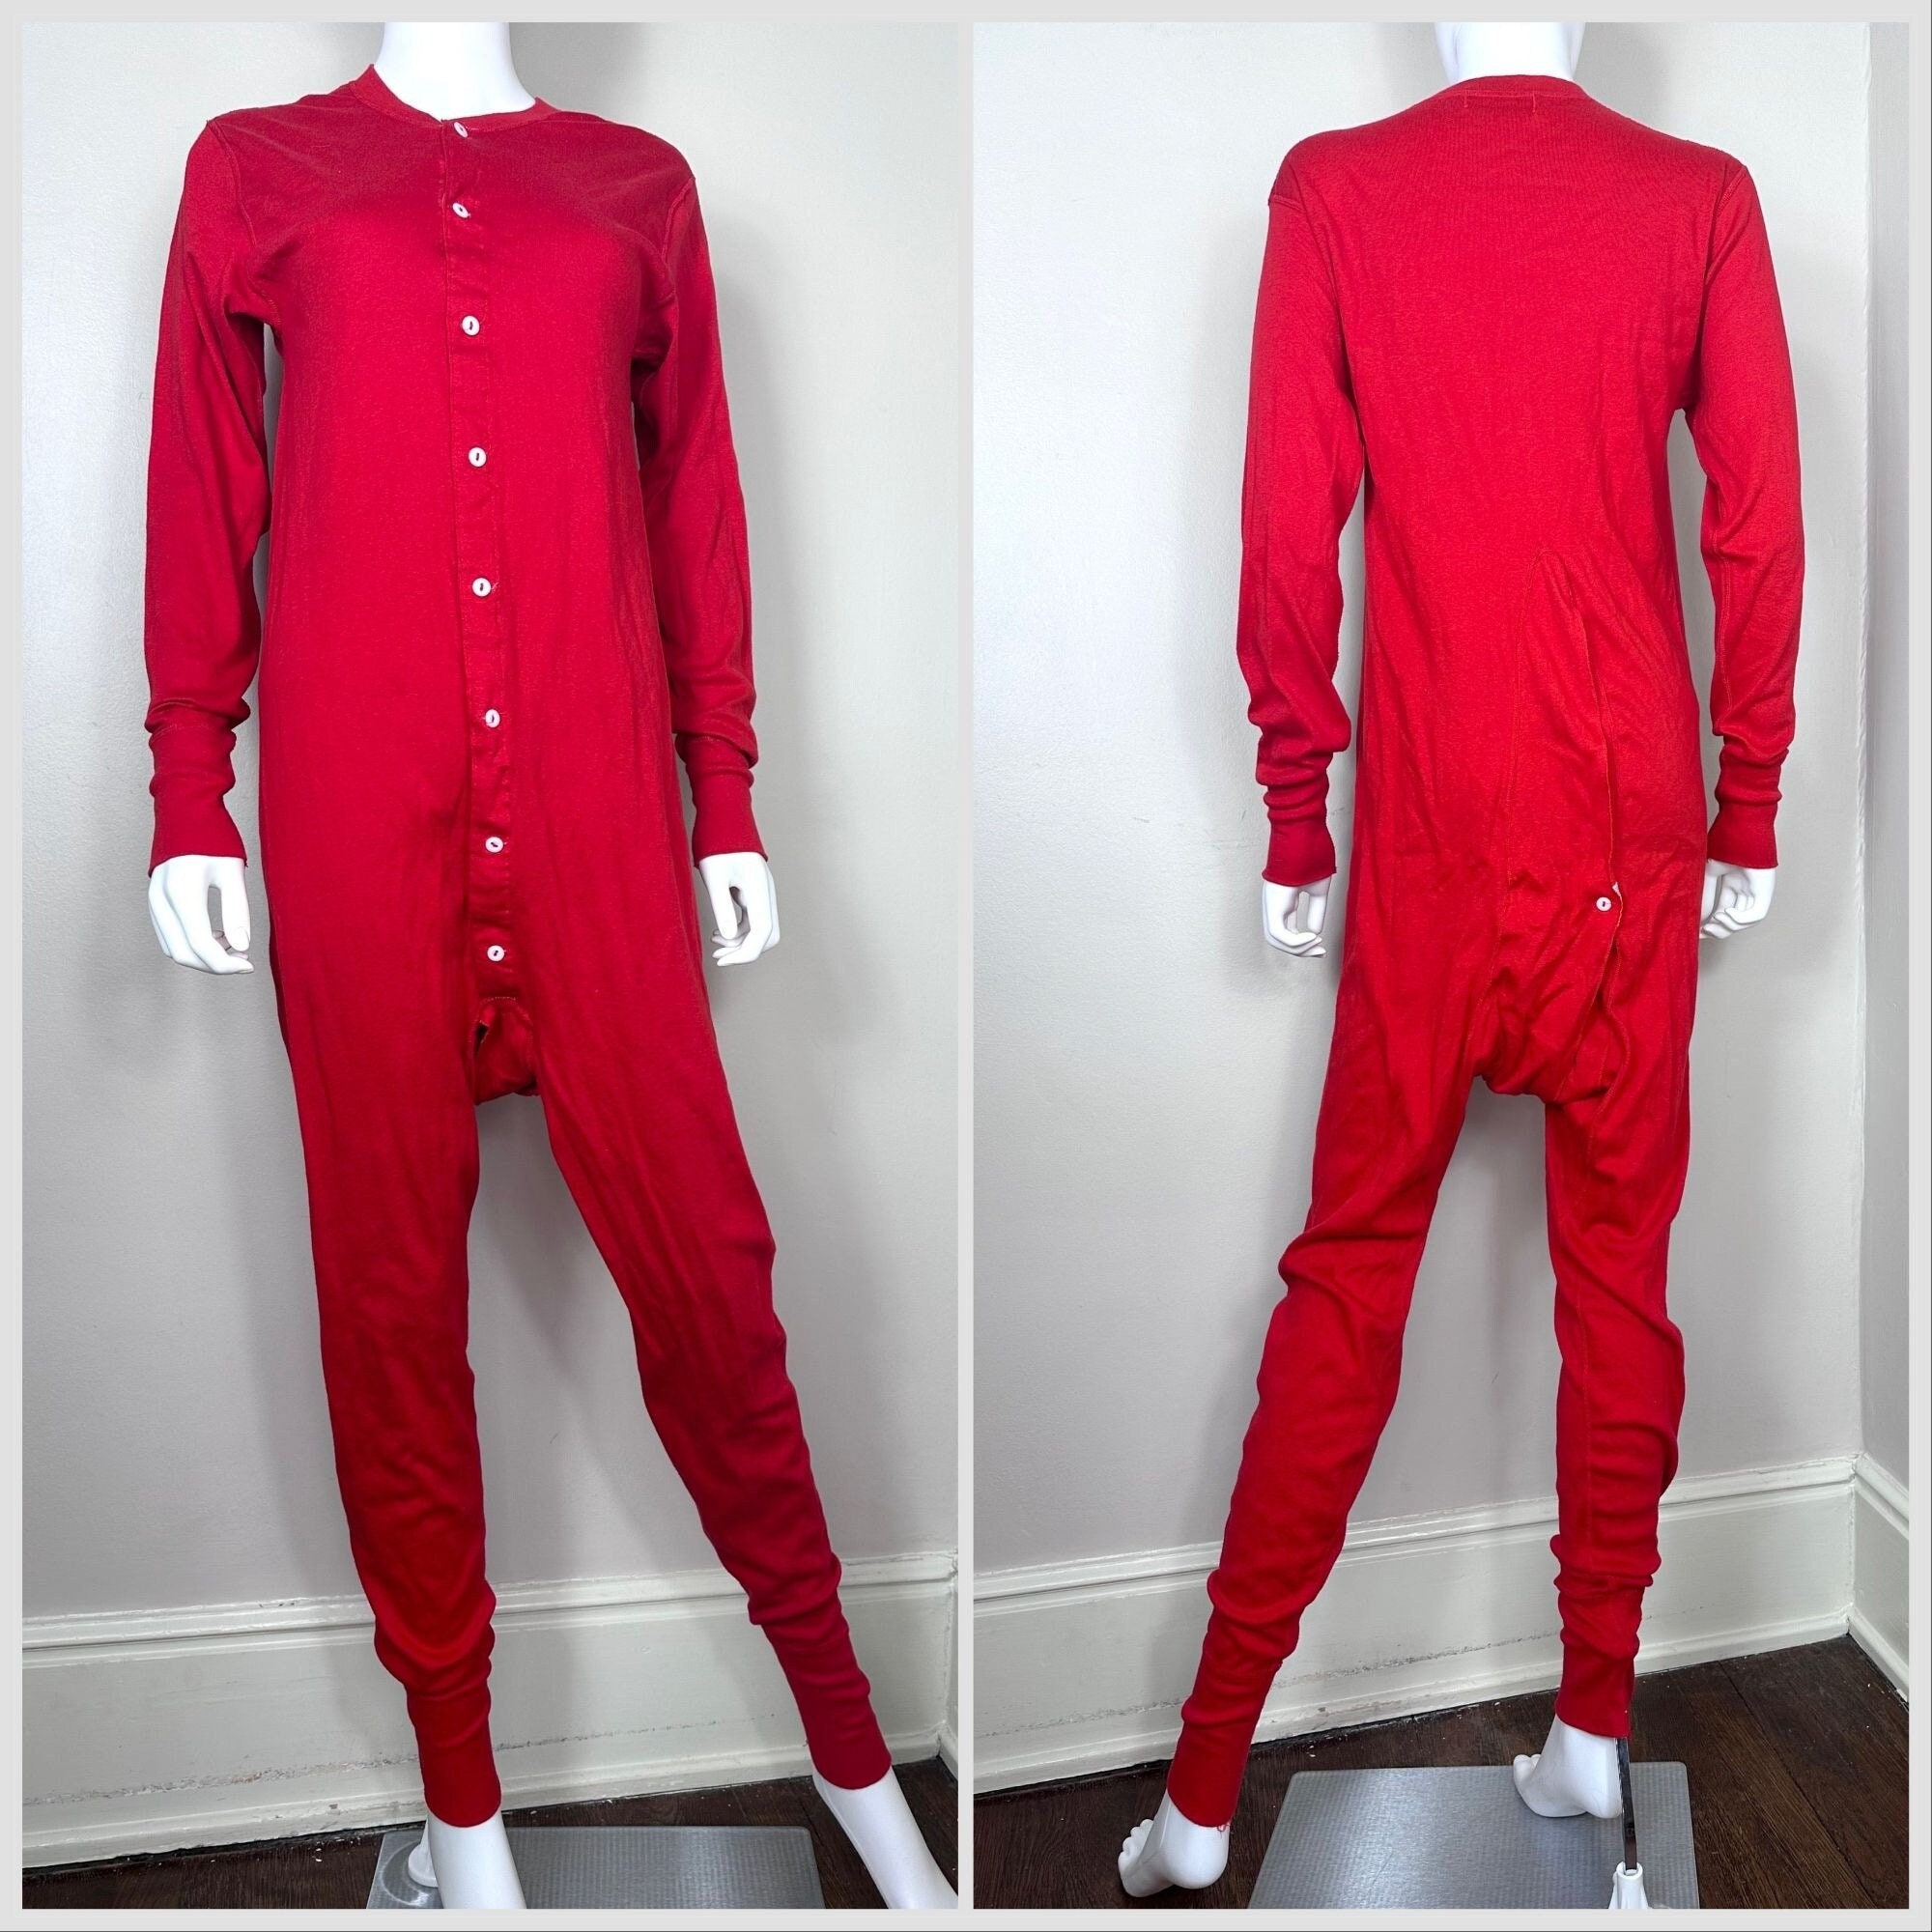 Red Union Suit Onesie Pajamas with Funny Butt Flap 